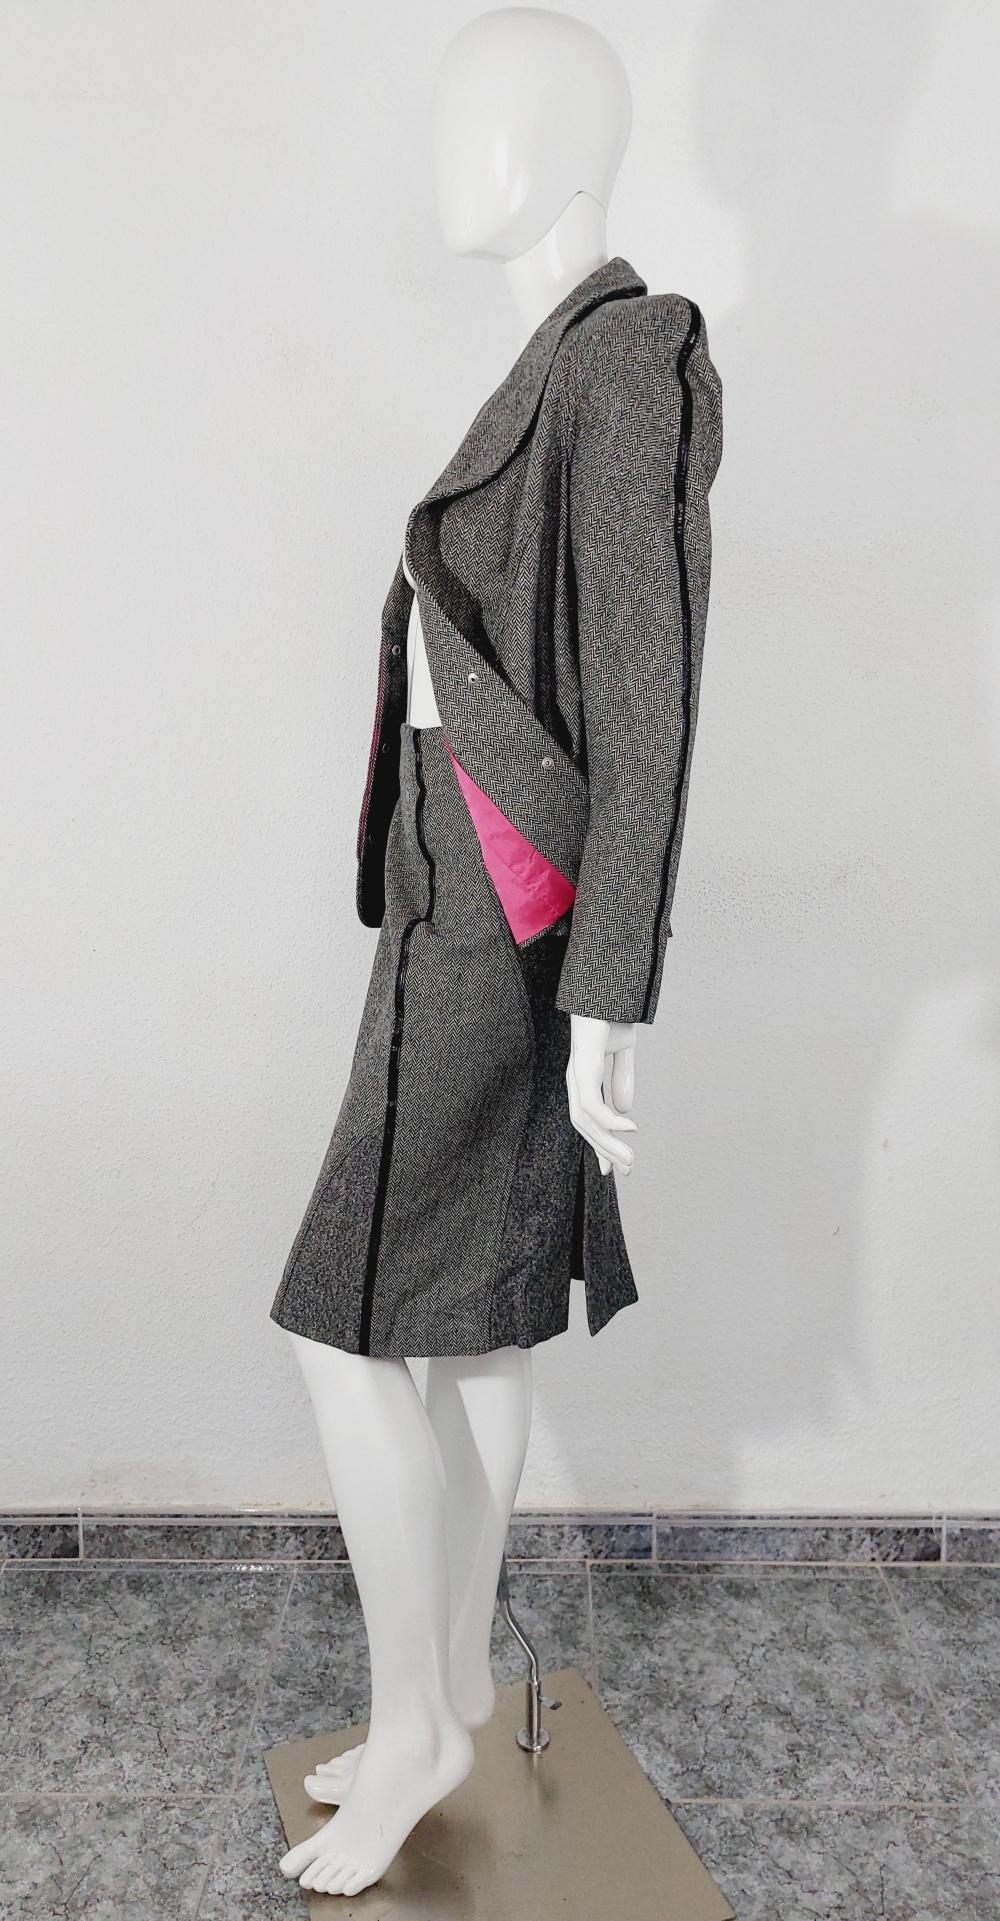 Thierry Mugler Pink Grey Gray Shiny Suit Jacket Gleam Sparkling Vintage 90’s 1990 Blazer Faux Leather Pocket Elegant Skirt

Excellent condition.
Grey & Shiny out, pink inside.
Button closure (blazer(, Zip closure (skirt)
Faux leather stripe ont he